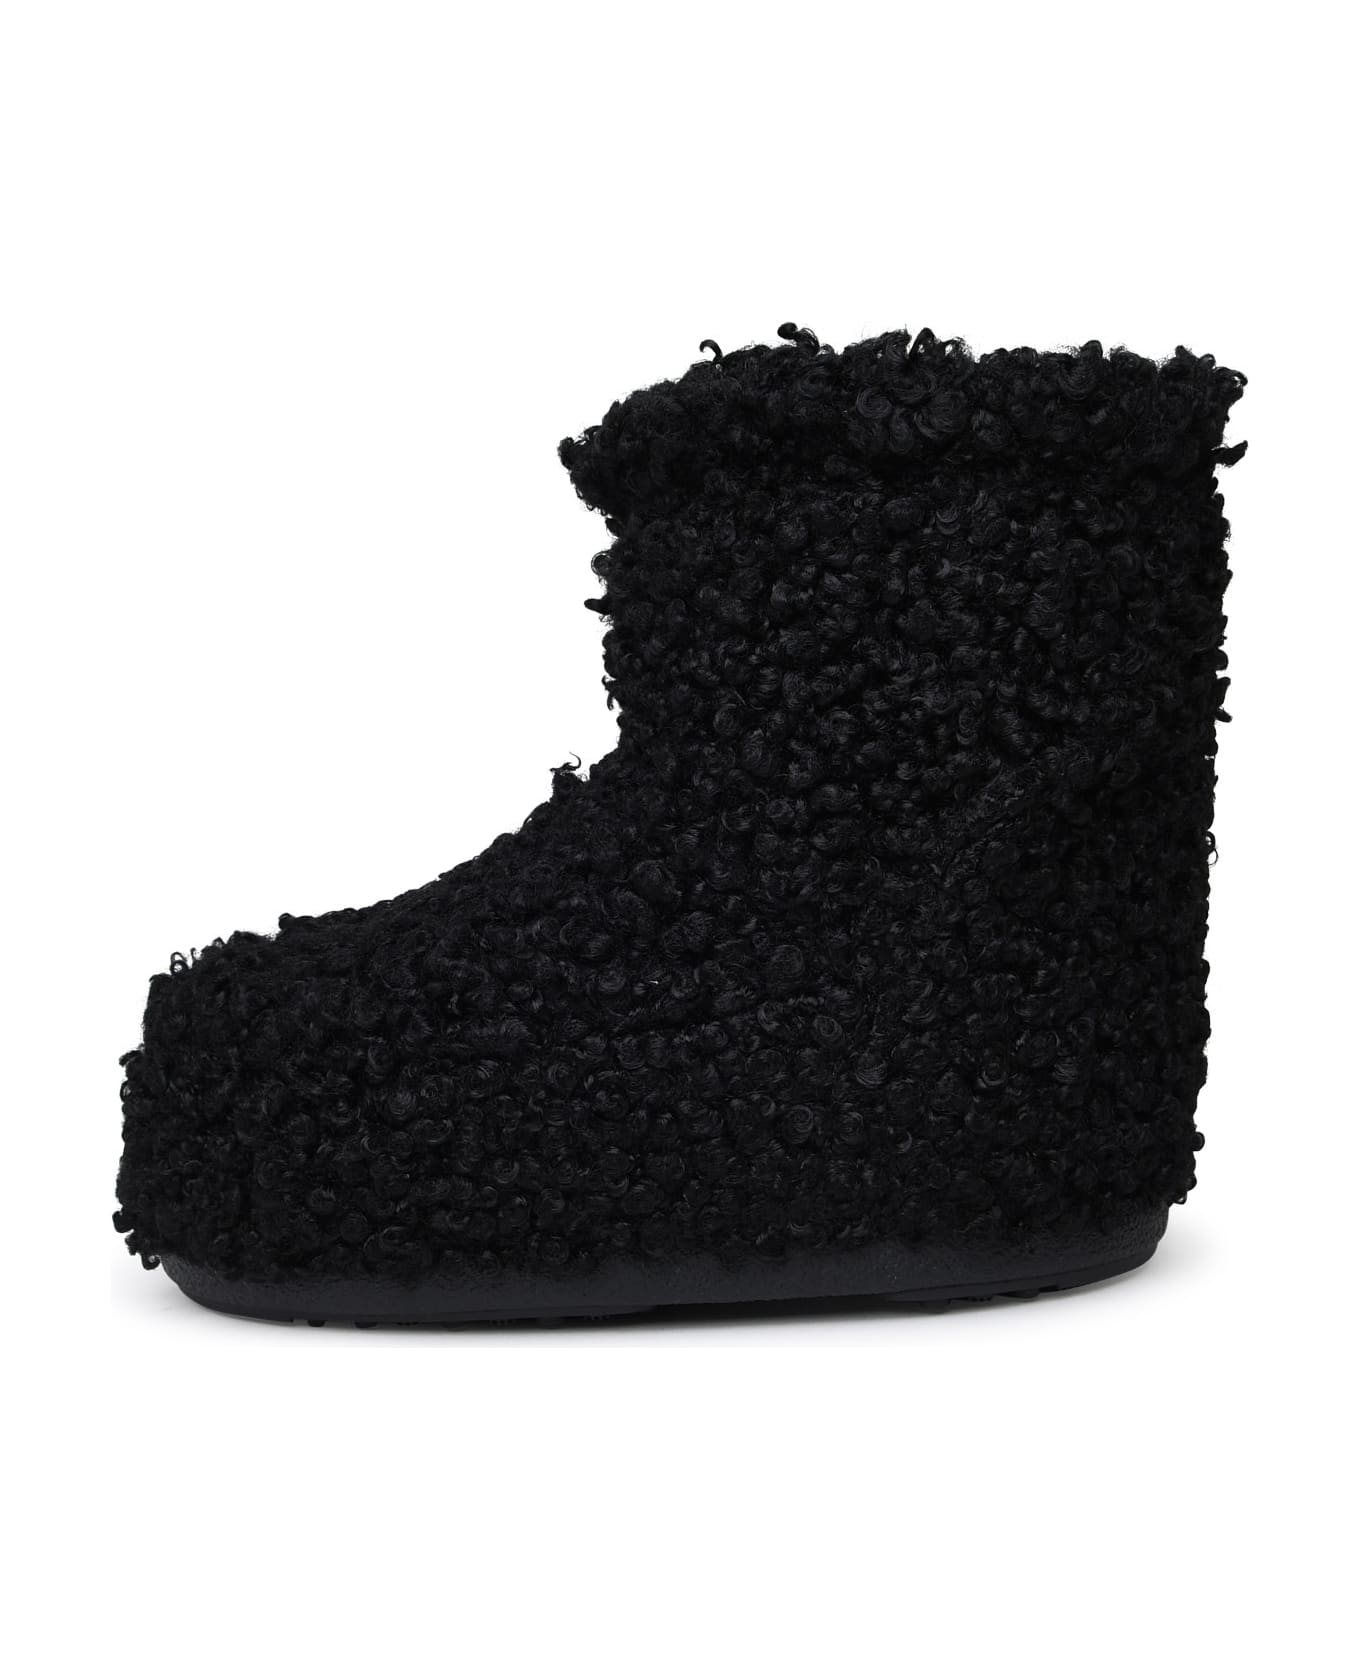 Moon Boot 'low-top Icon Faux' Black Polyester Boots - Black ブーツ